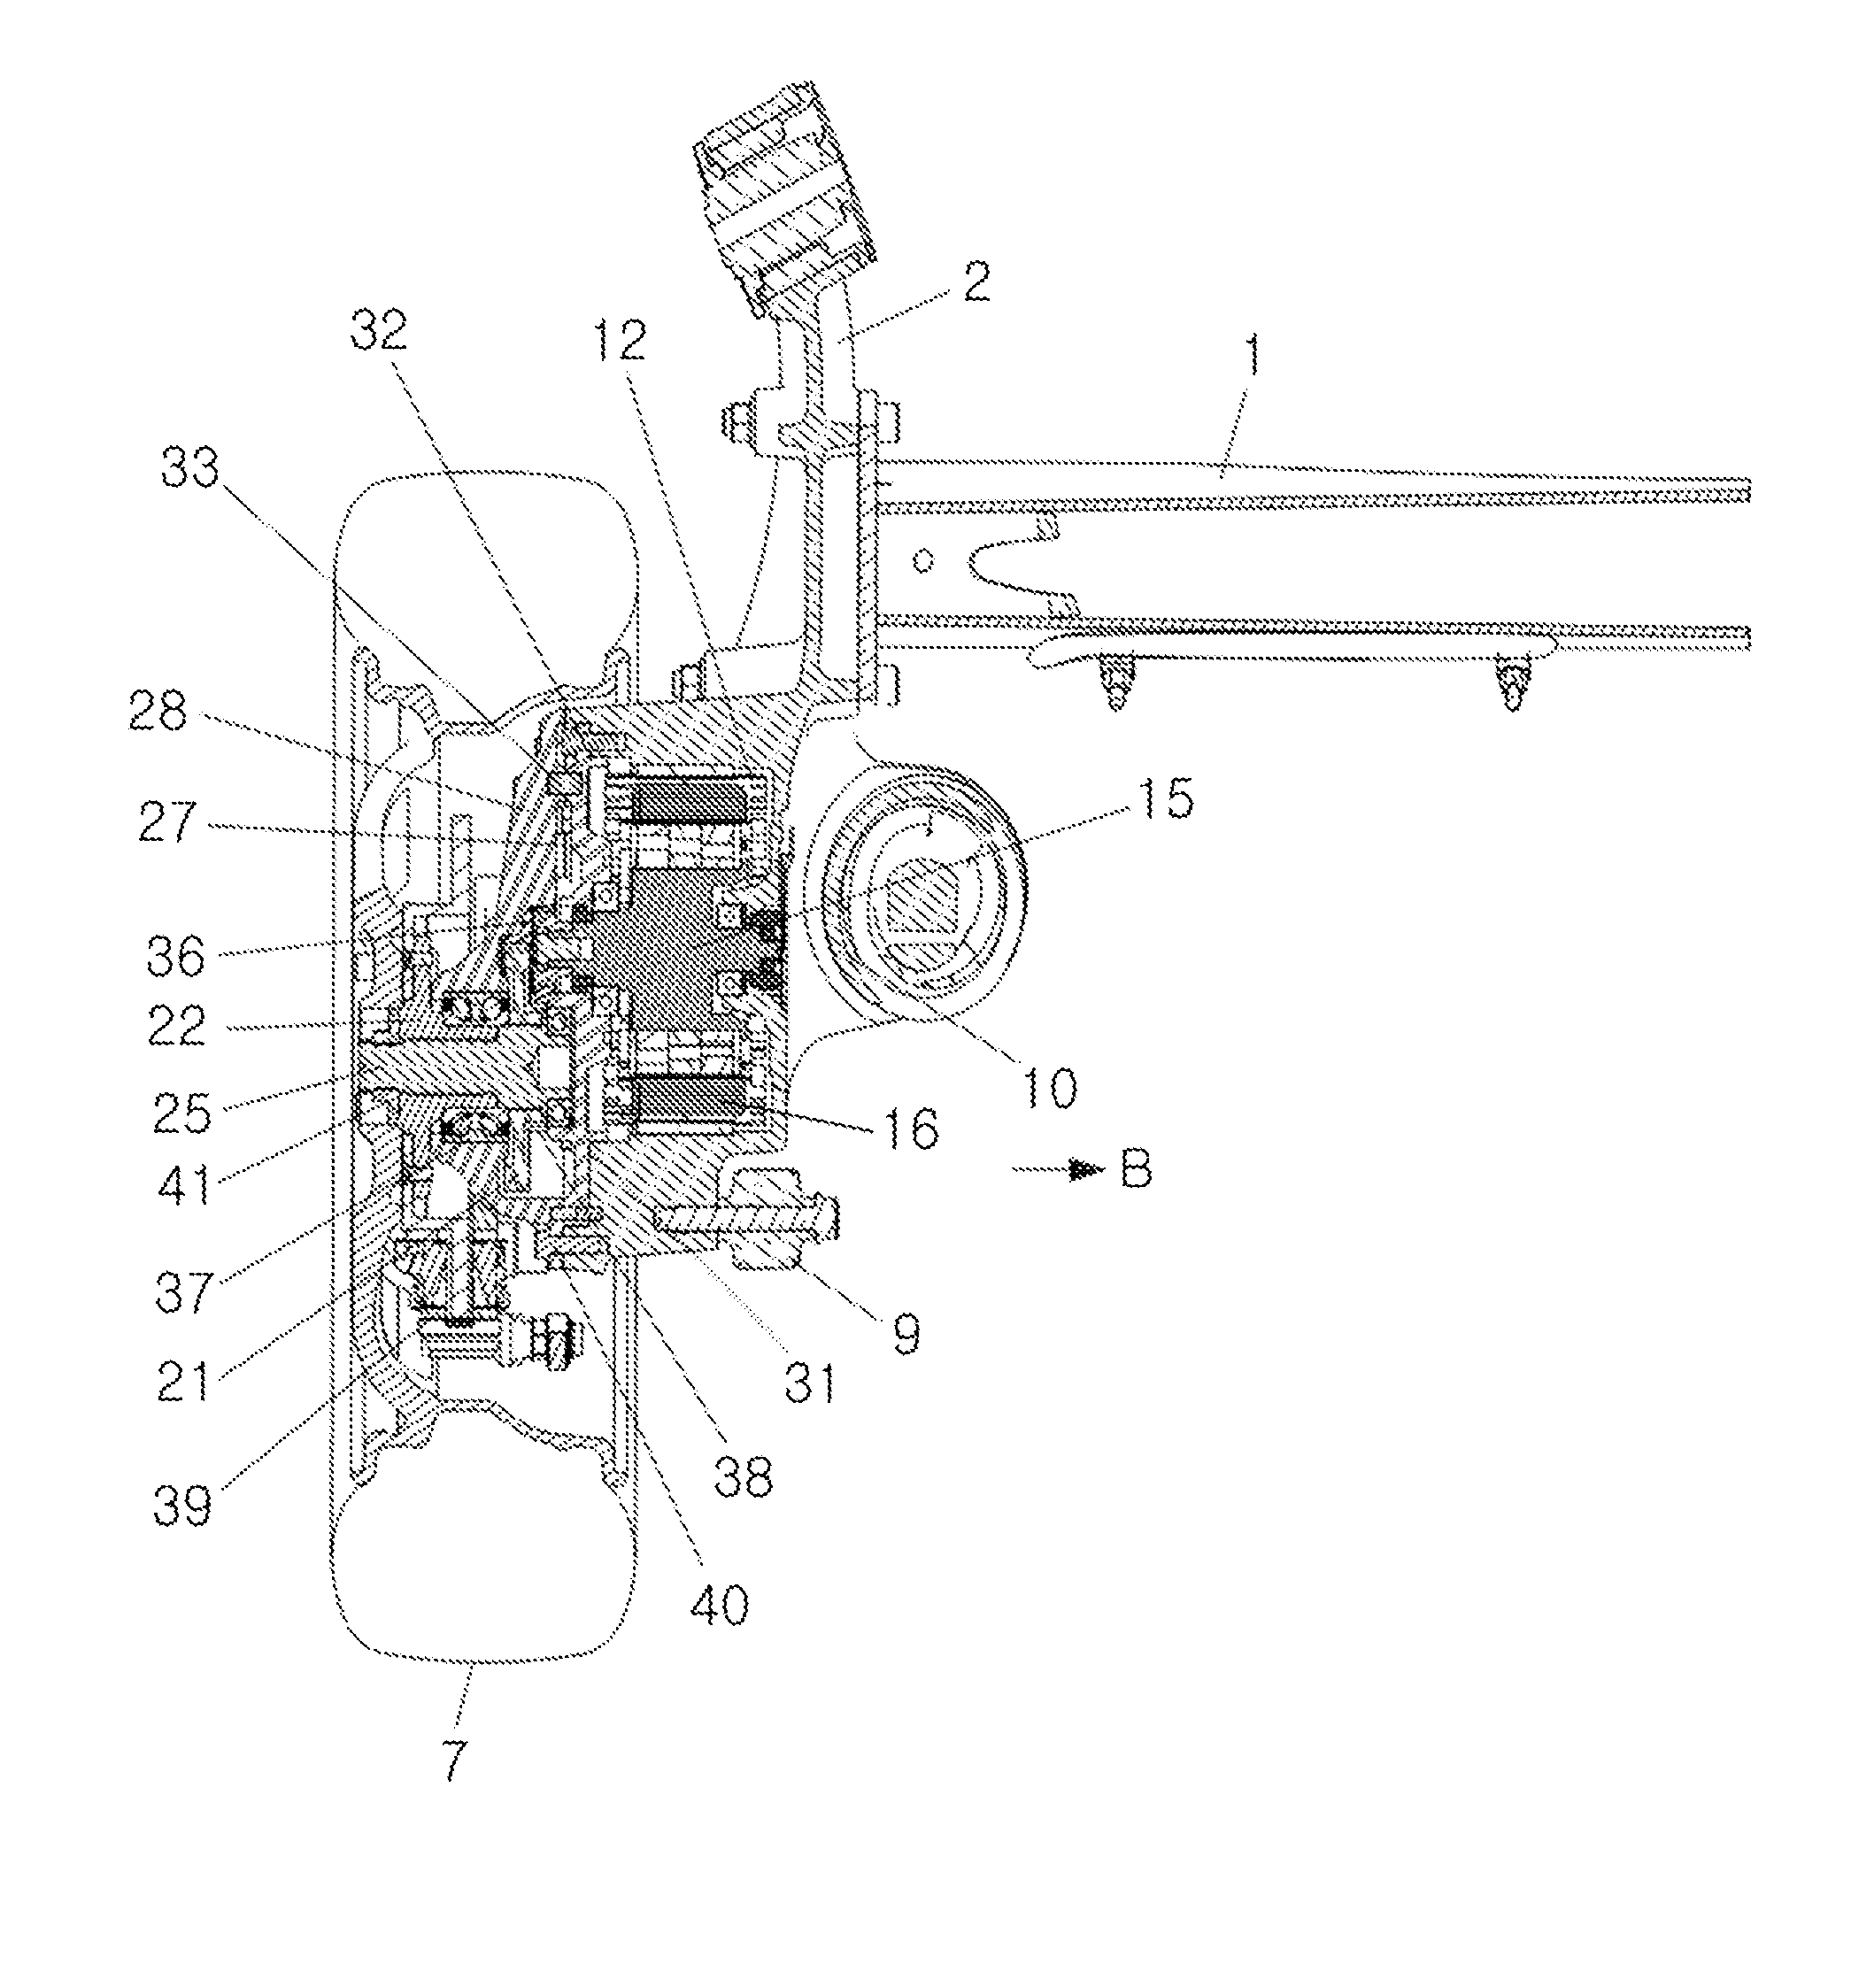 Device for driving rear wheel of electric vehicle